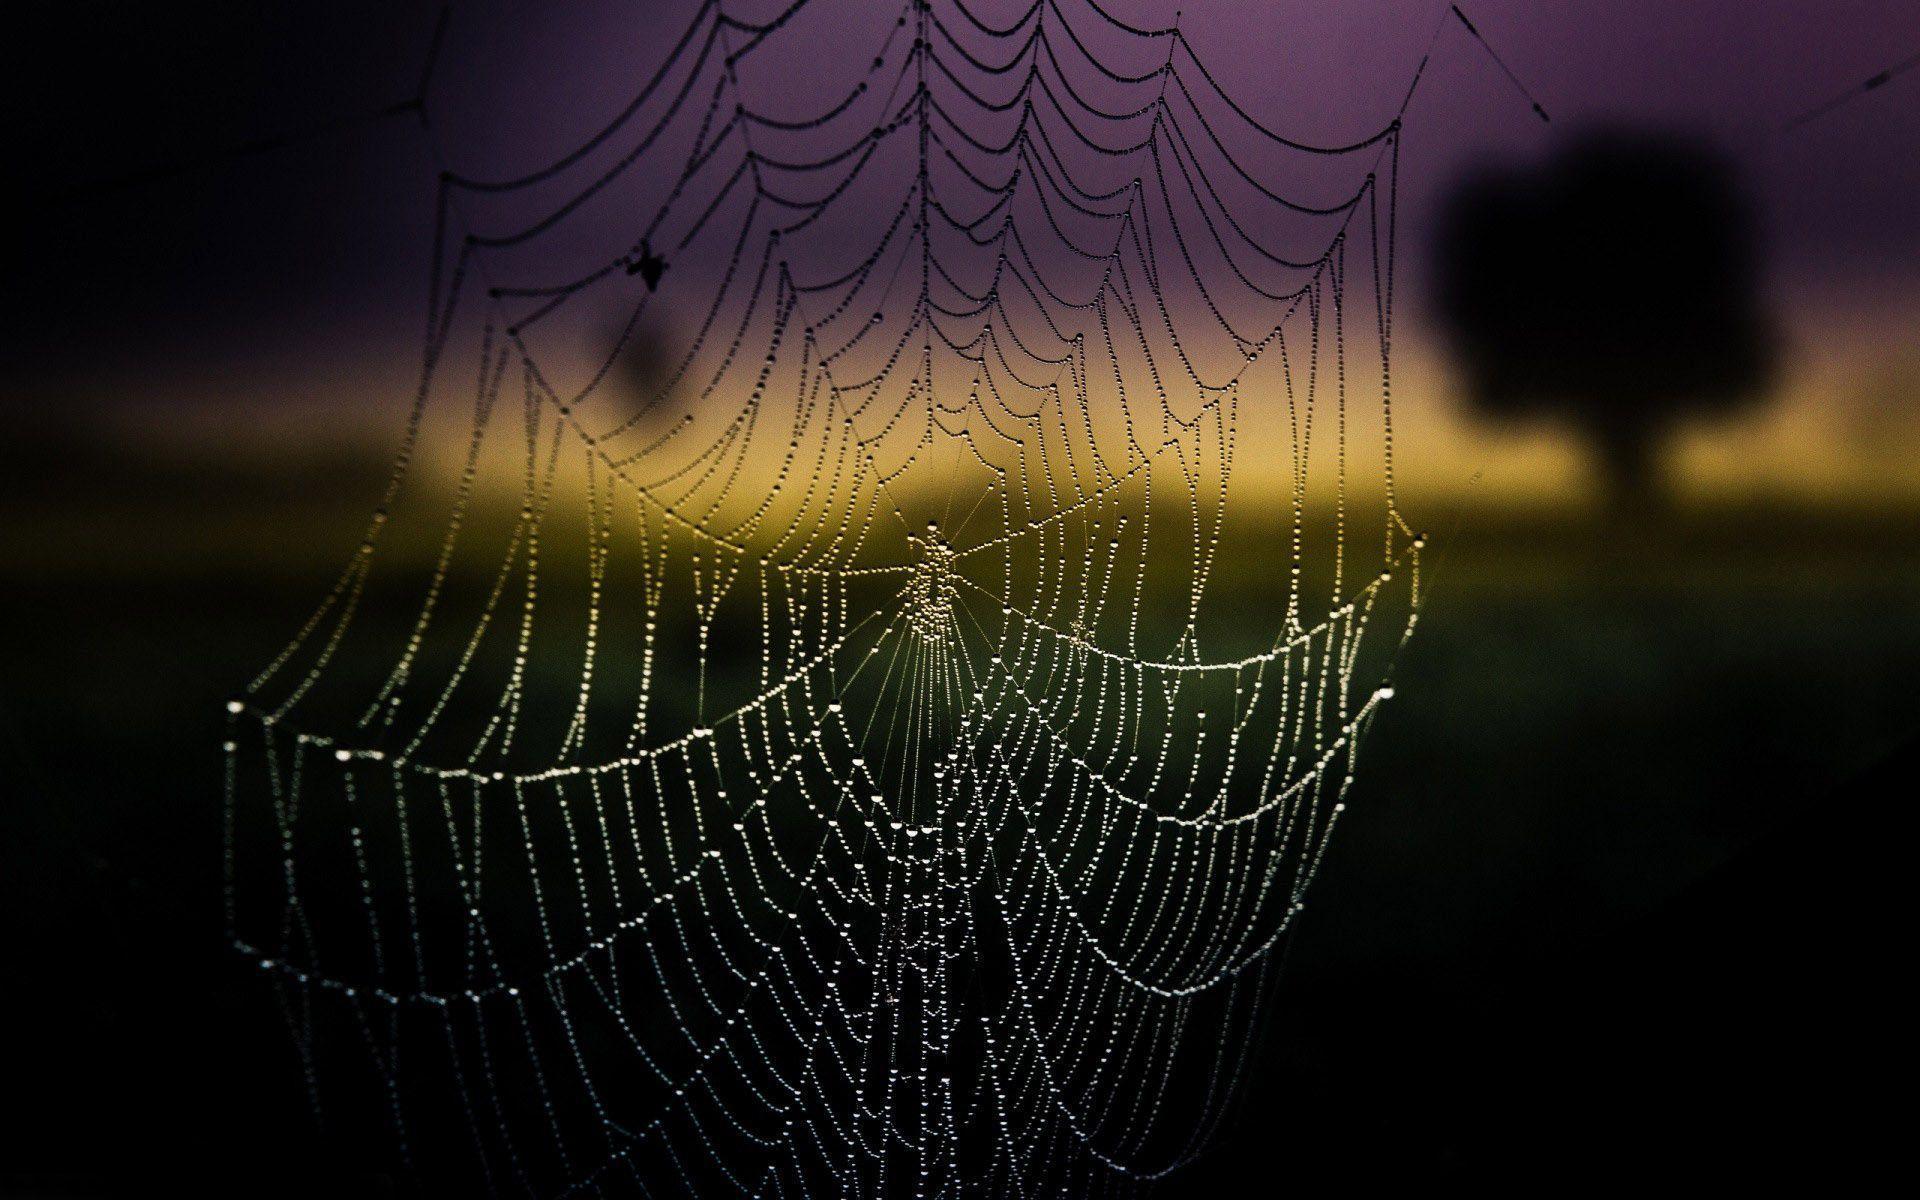 spider and web wallpaper 1920x1080